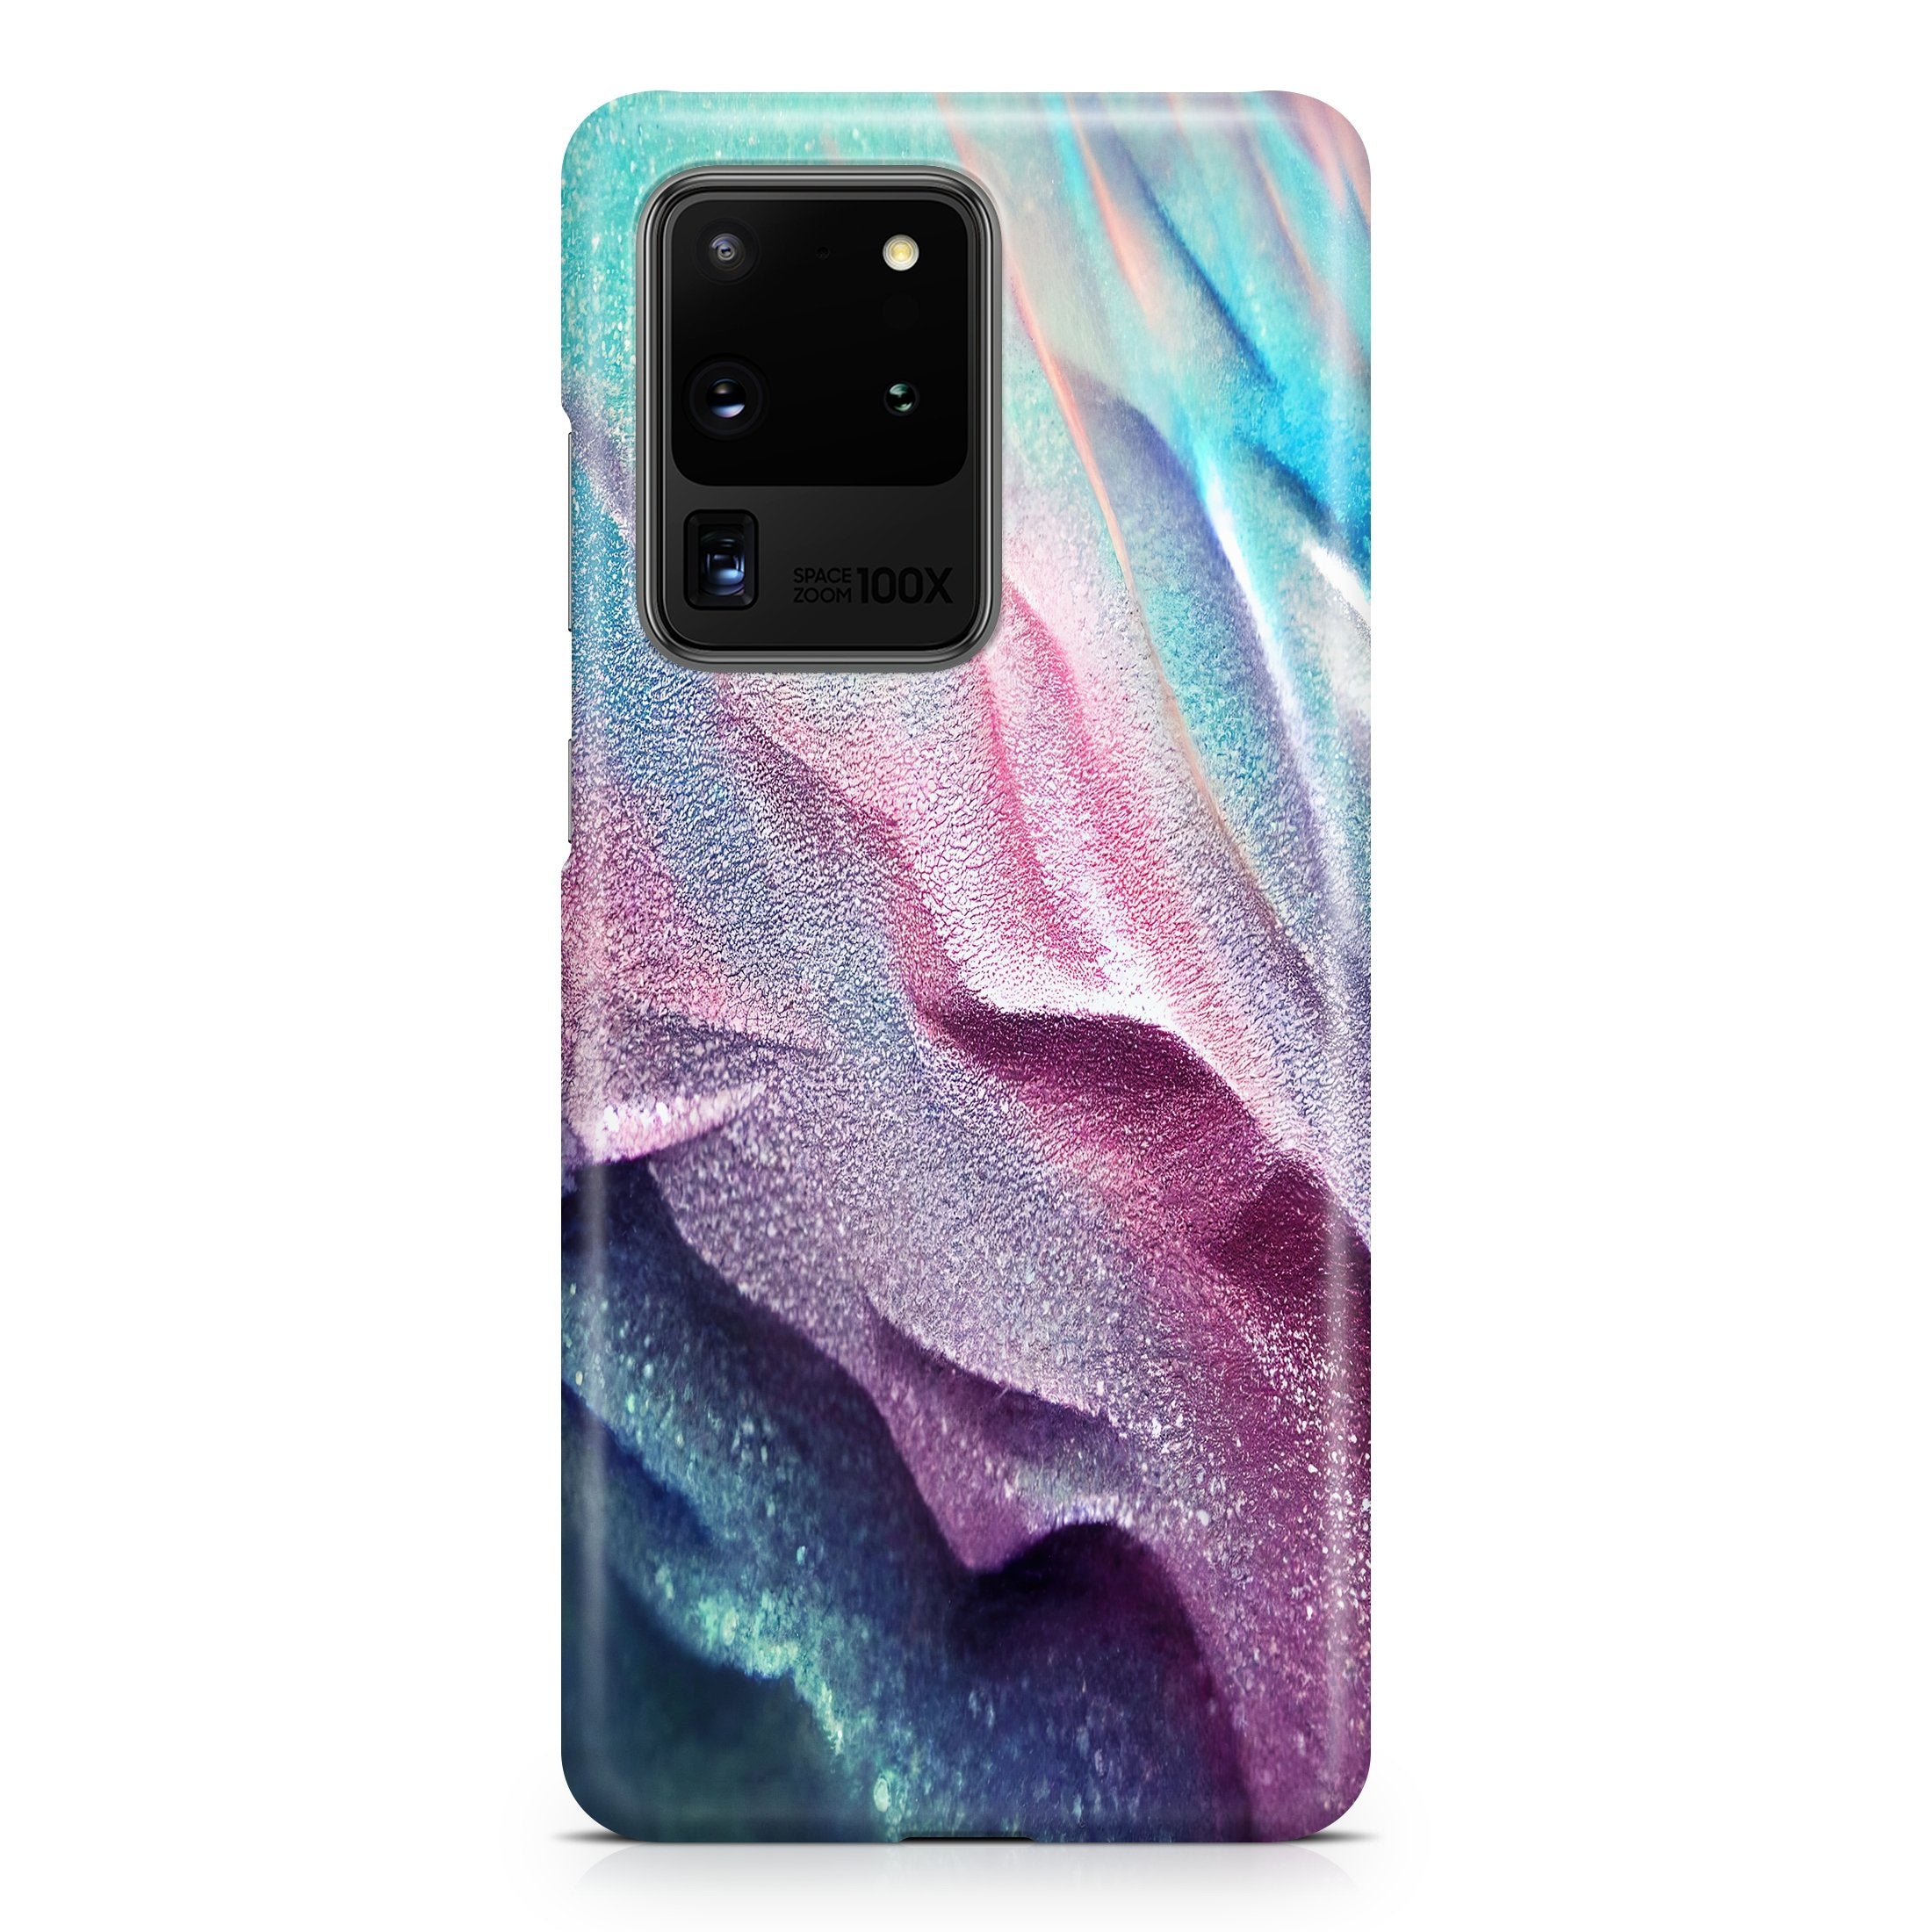 Butterfly Sands - Samsung phone case designs by CaseSwagger